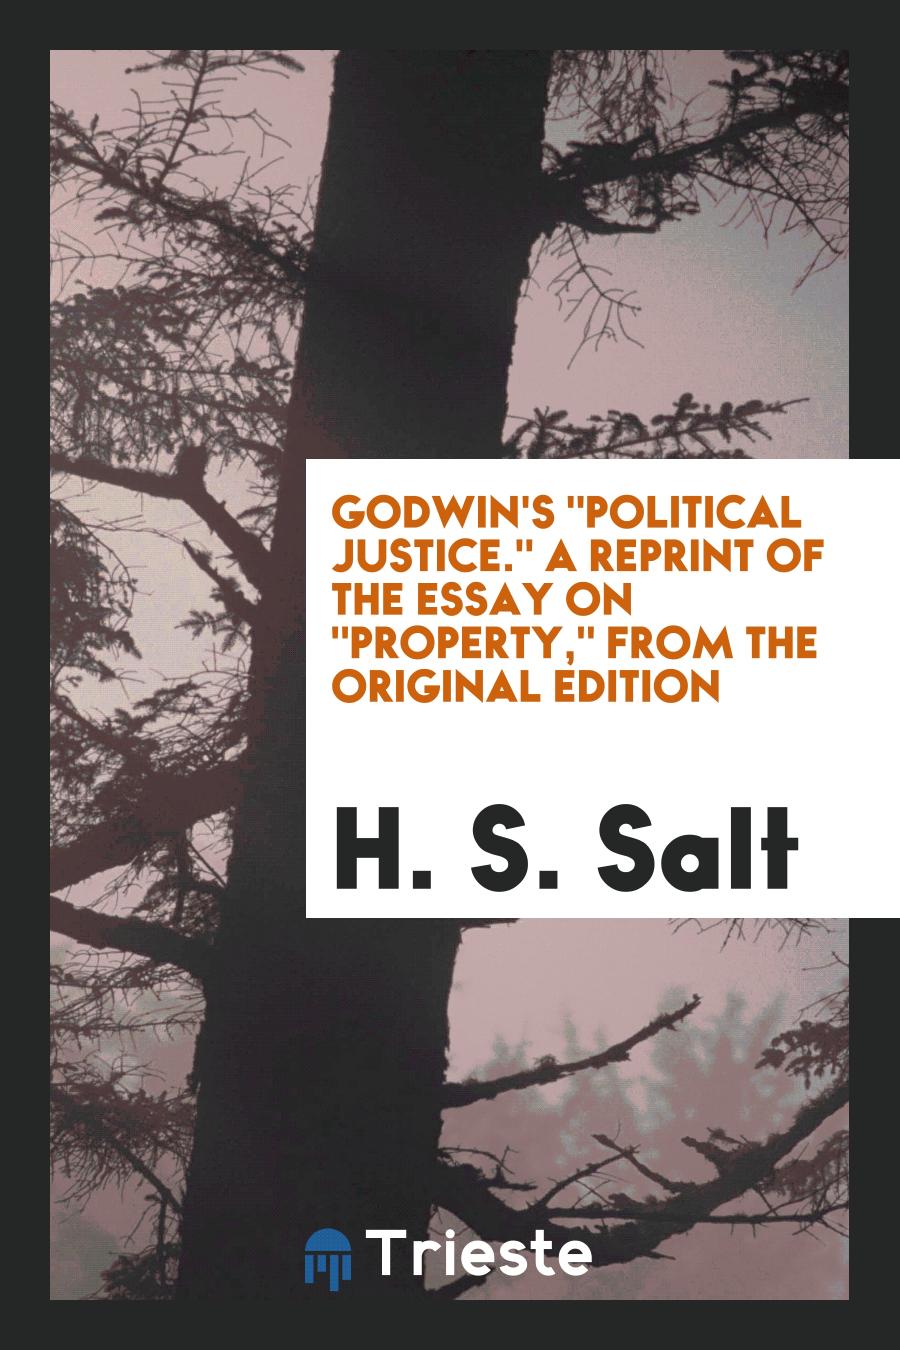 Godwin's "Political Justice." A Reprint of the Essay on "Property," from the Original Edition